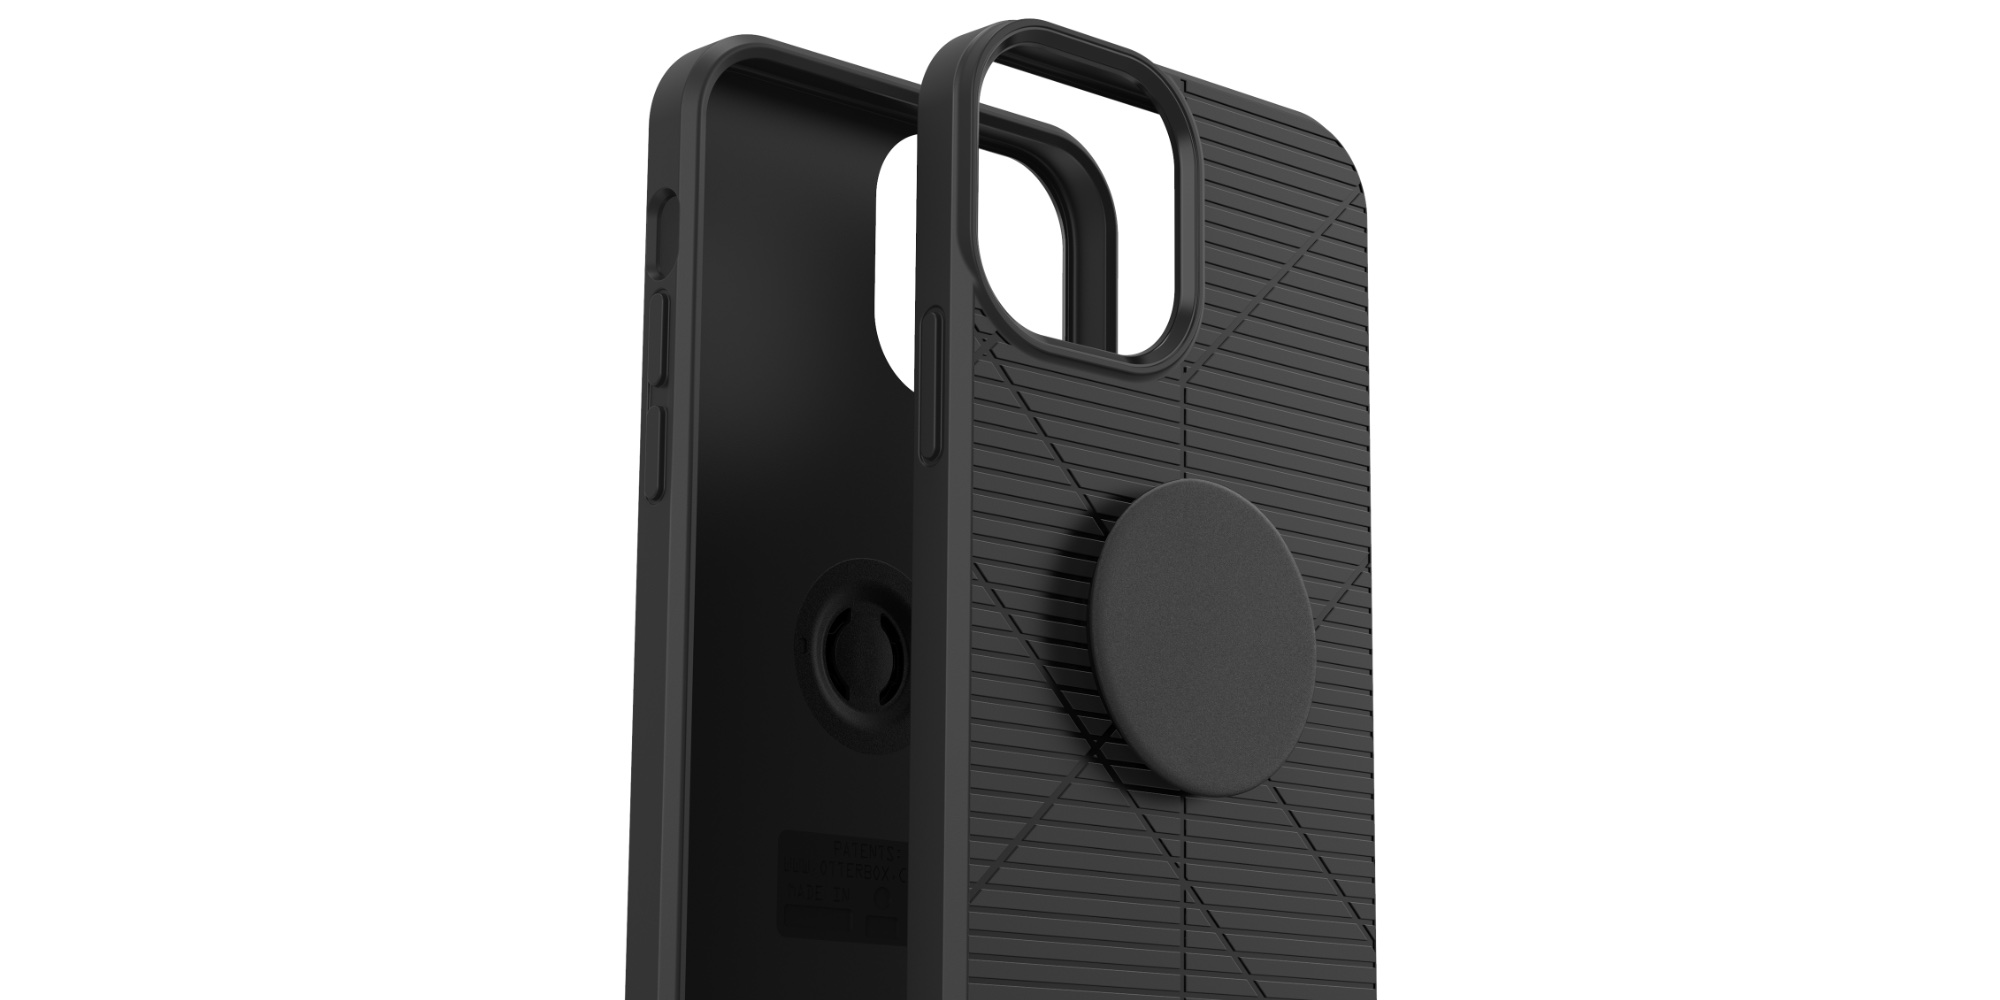 Outfit Your Iphone 12 Pro With An Otterbox Popsocket Case At Save 43 9to5toys